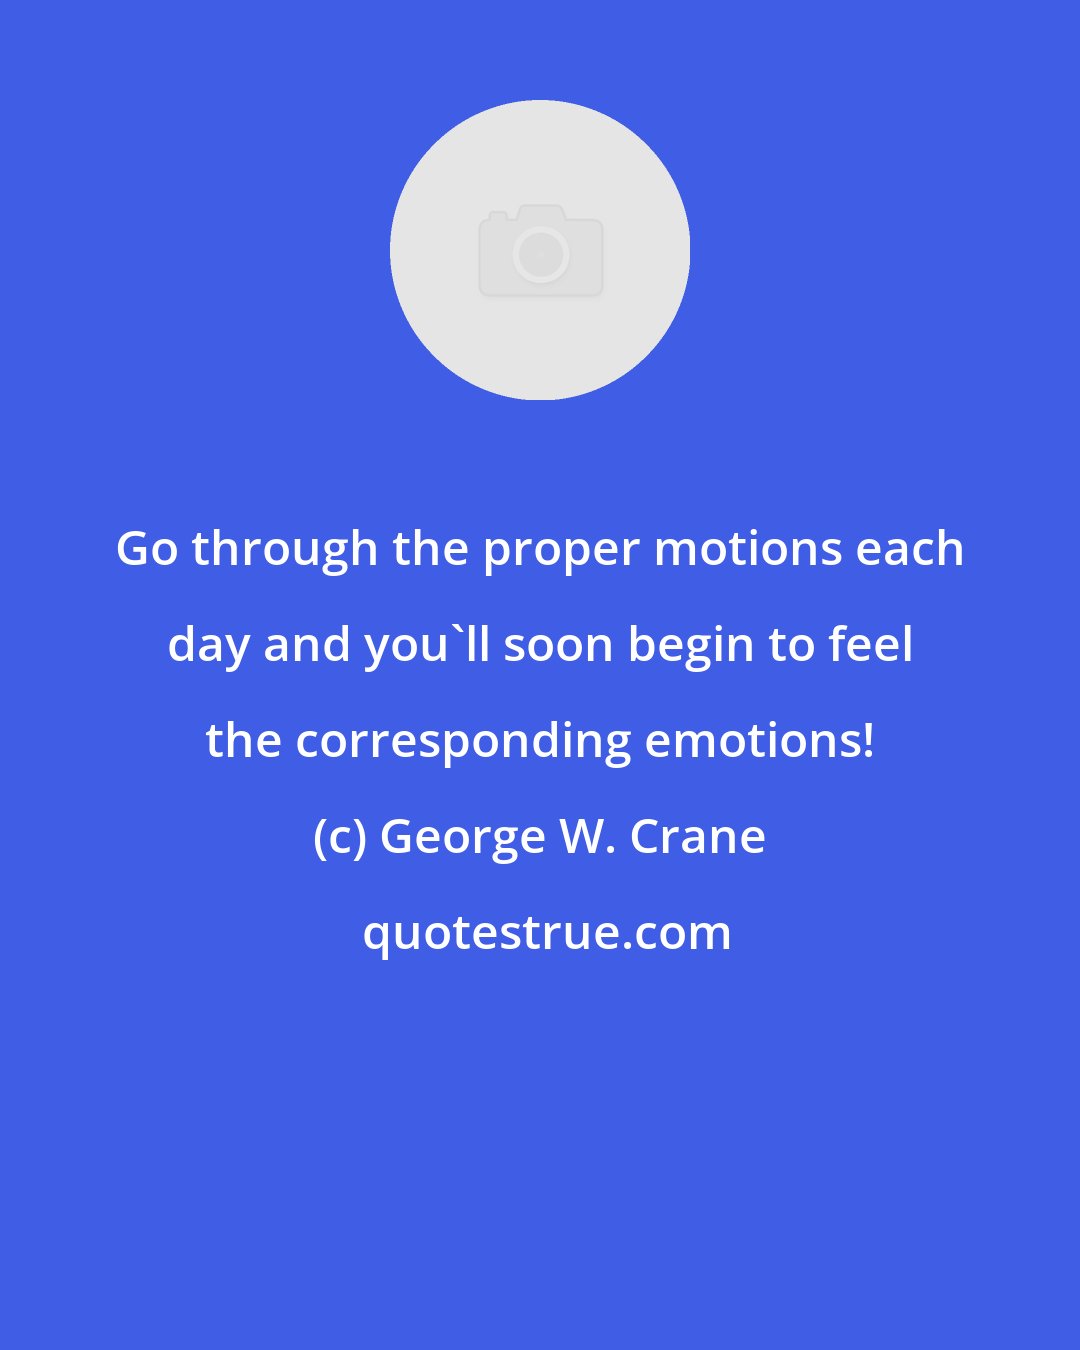 George W. Crane: Go through the proper motions each day and you'll soon begin to feel the corresponding emotions!